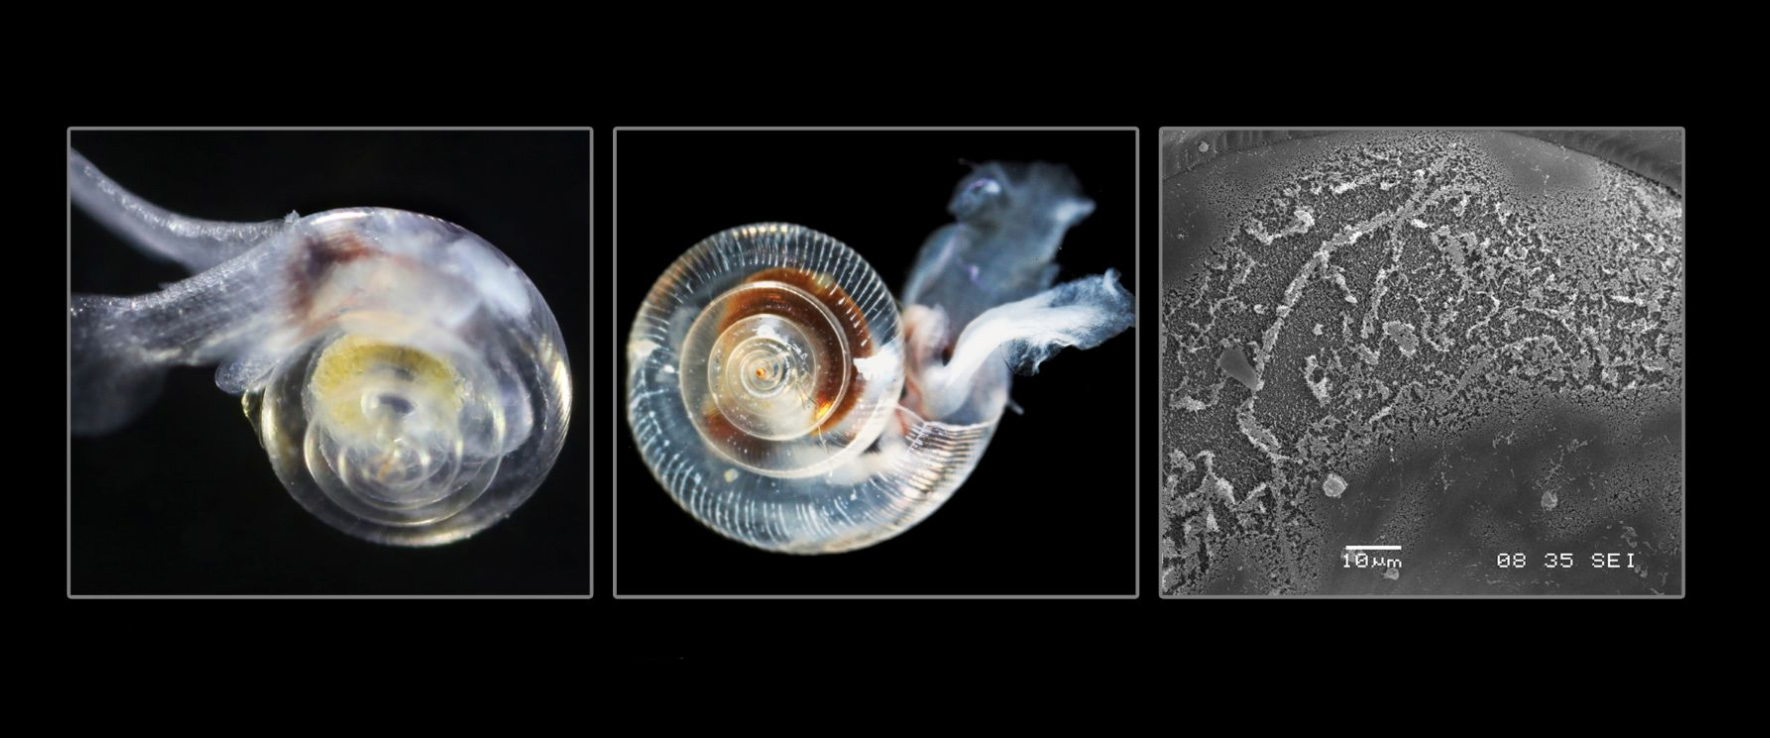 A healthy pteropod, or sea snail, is an important food source for many fish and mammals (left). Early evidence of a compromised pteropod shell along the U.S. West Coast (center). Microscopic look at how ocean acidification eats away protective shells (right).